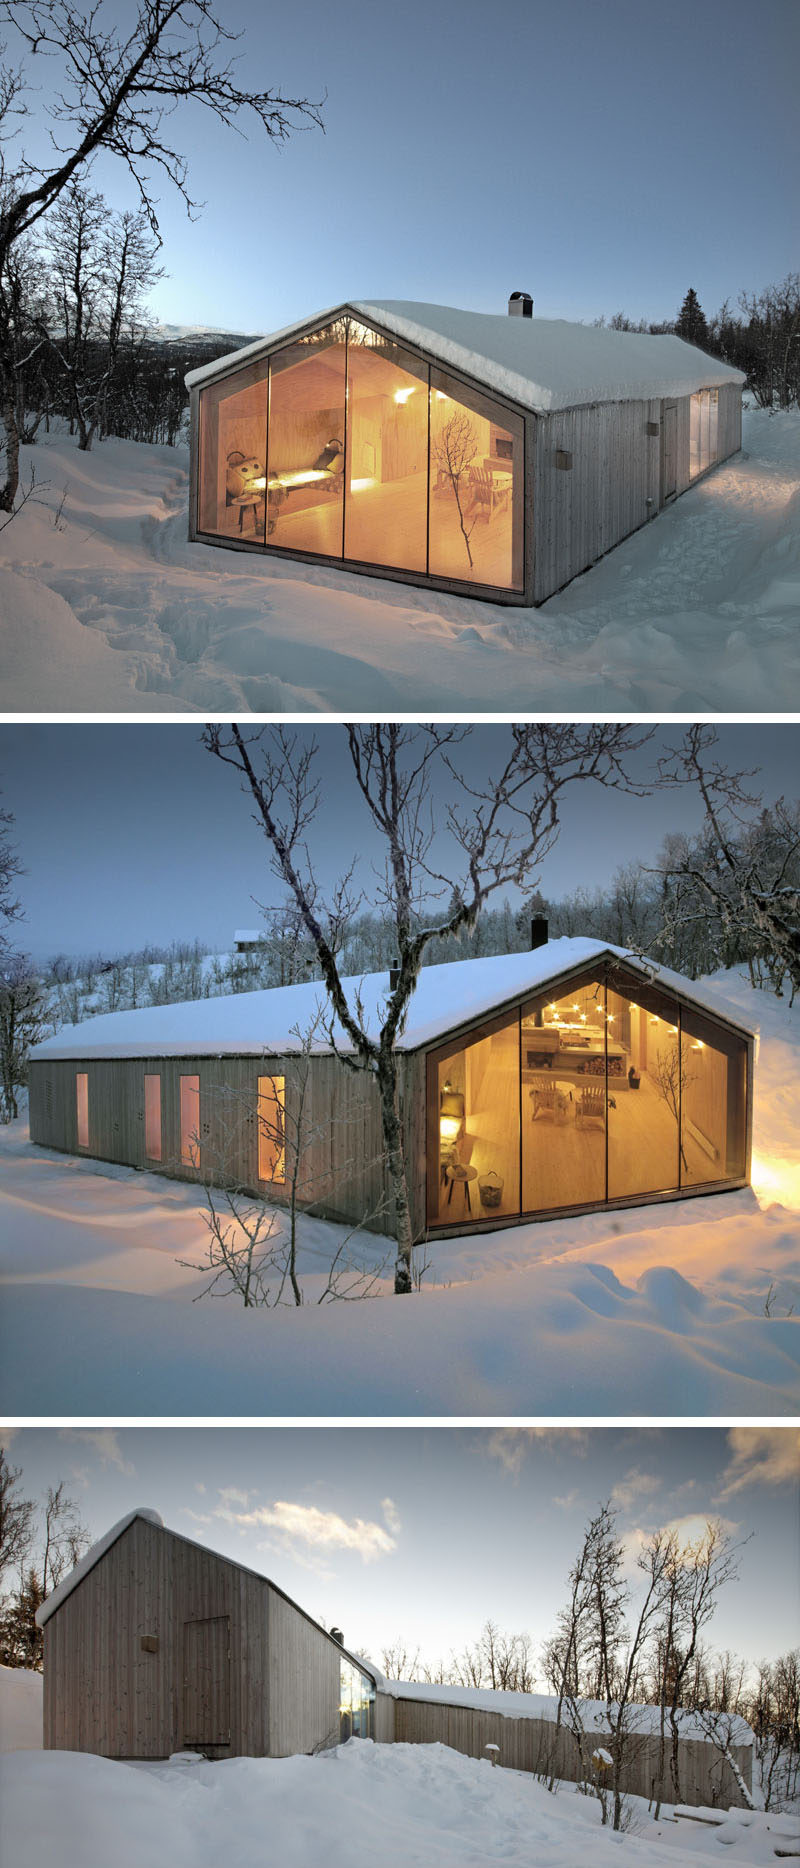 19 Examples Of Modern Scandinavian House Designs | Light wood siding and large floor to ceiling windows keep both the exterior and interior of this holiday home bright and welcoming while also allowing it to blend into the natural surroundings.